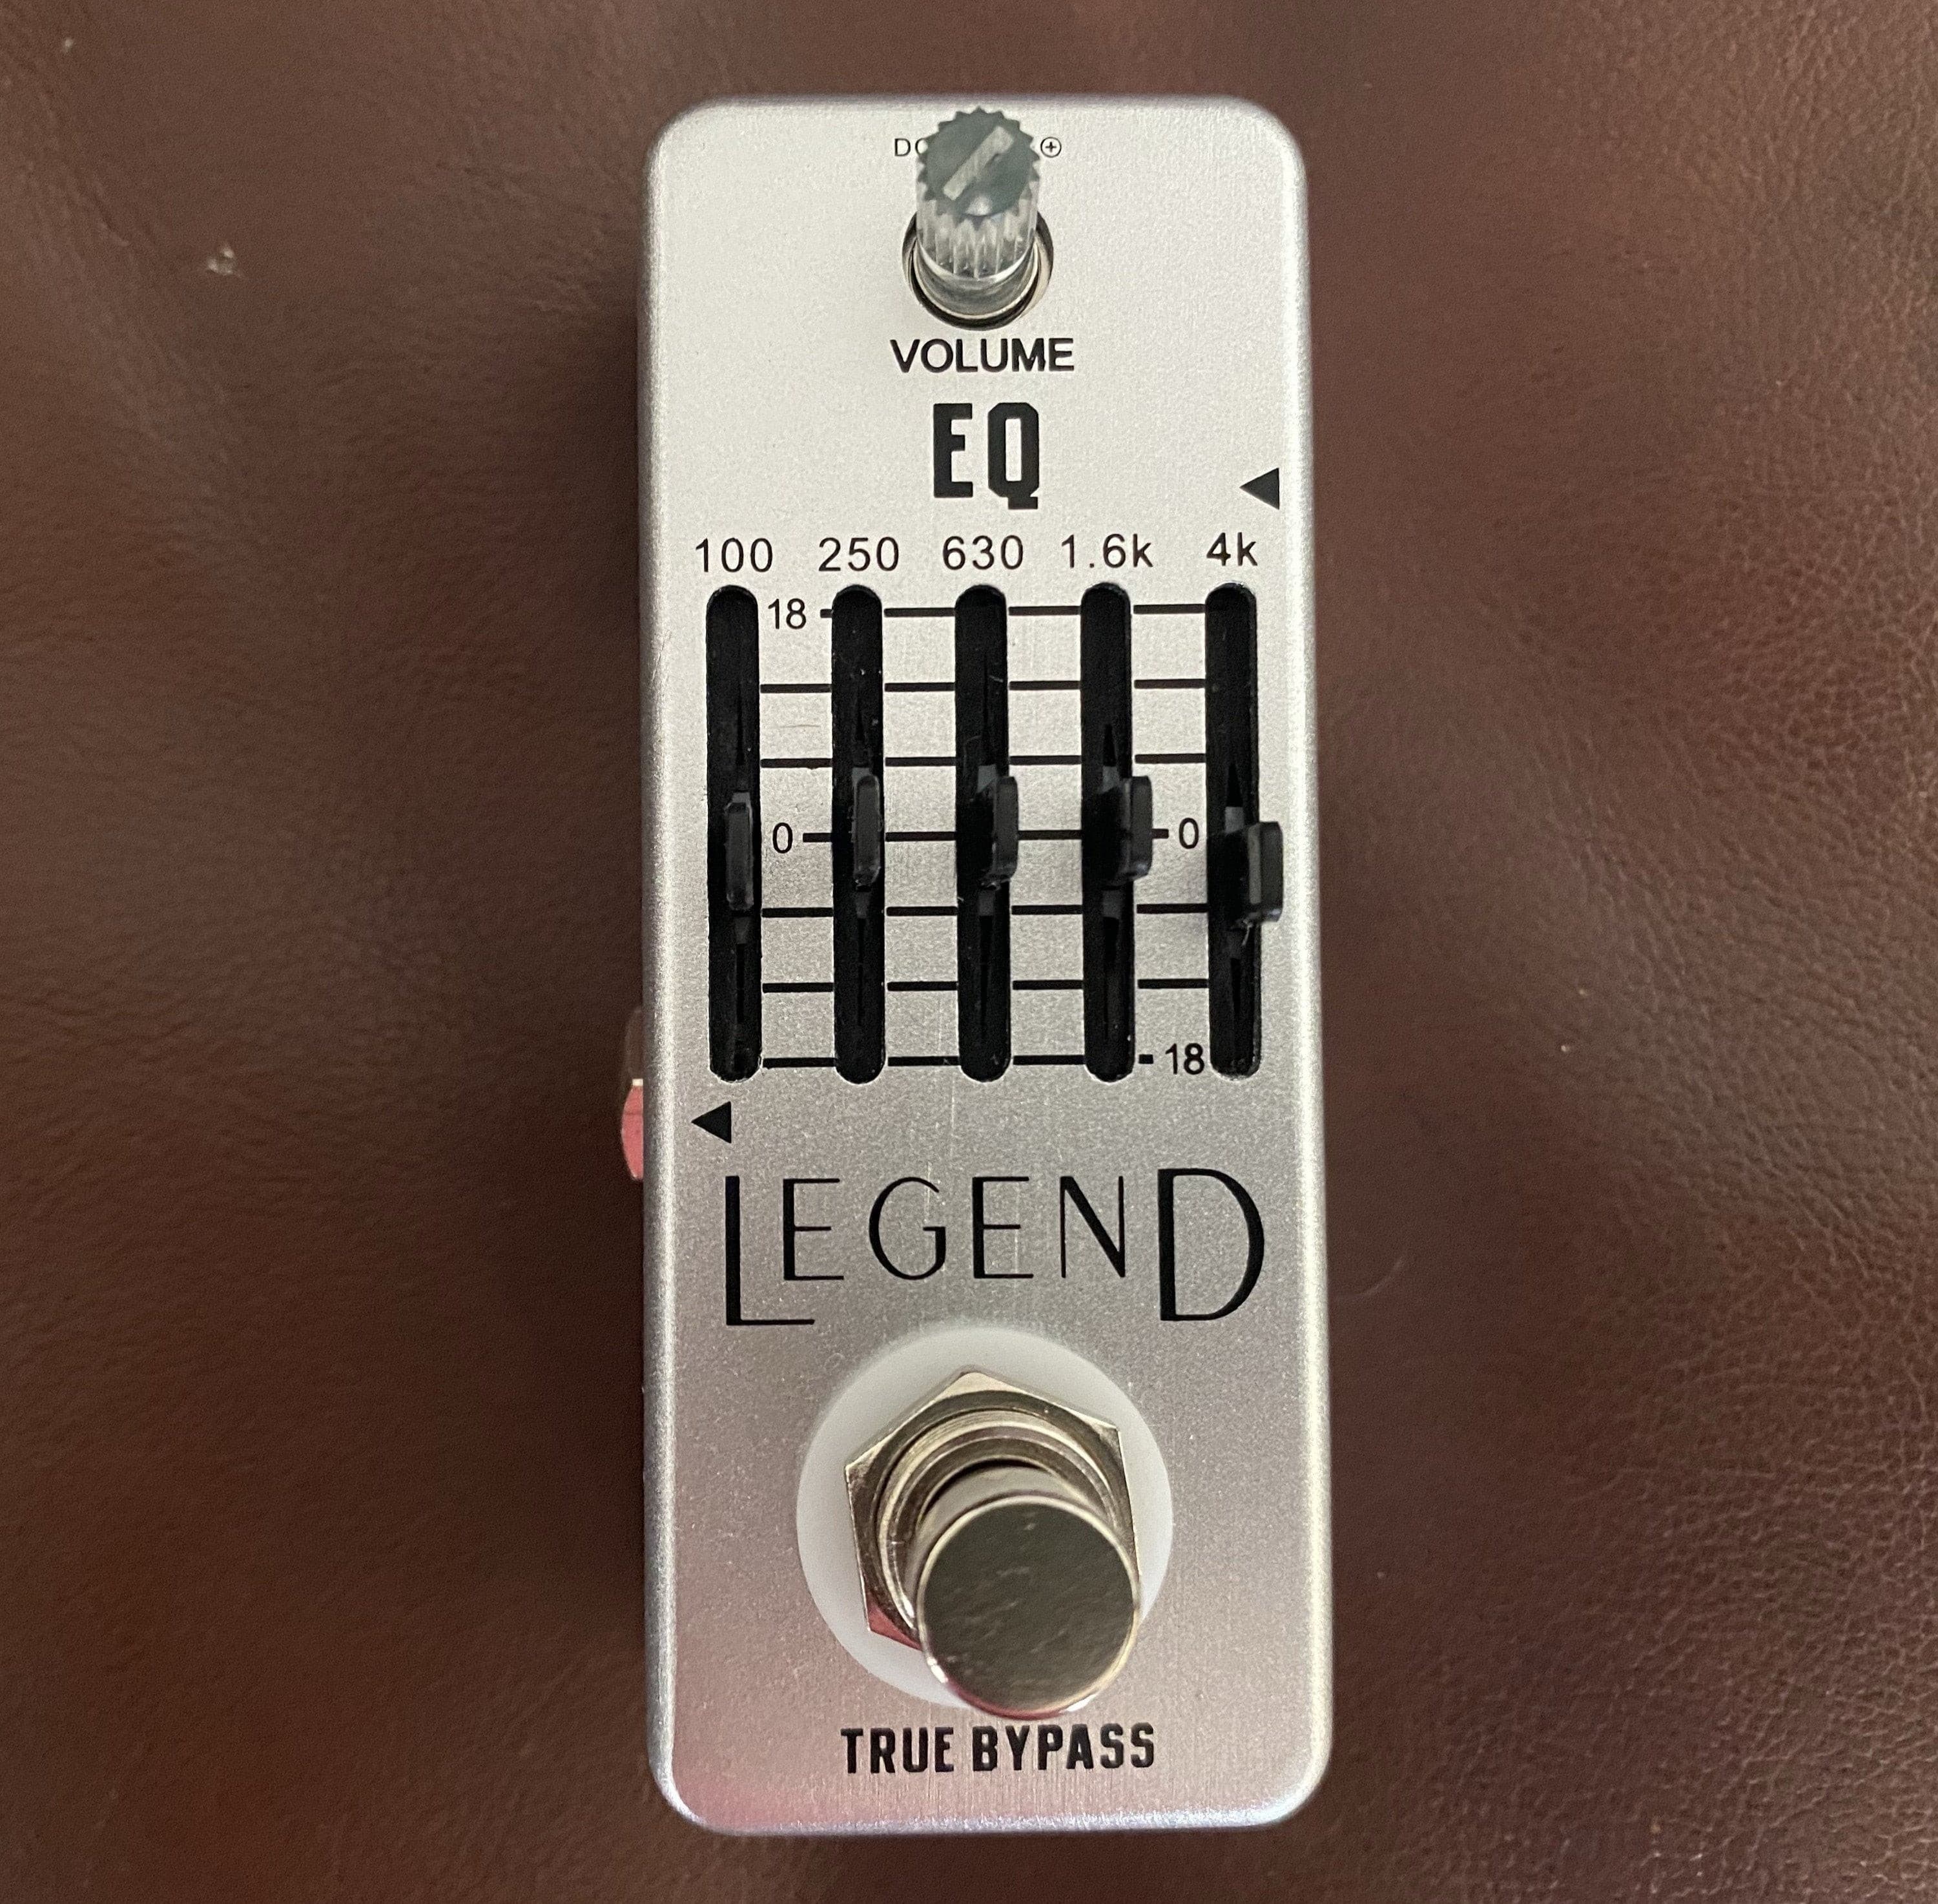 SMJ LEGEND Series EQ "Control" Pedal, Accessory for sale at Richards Guitars.